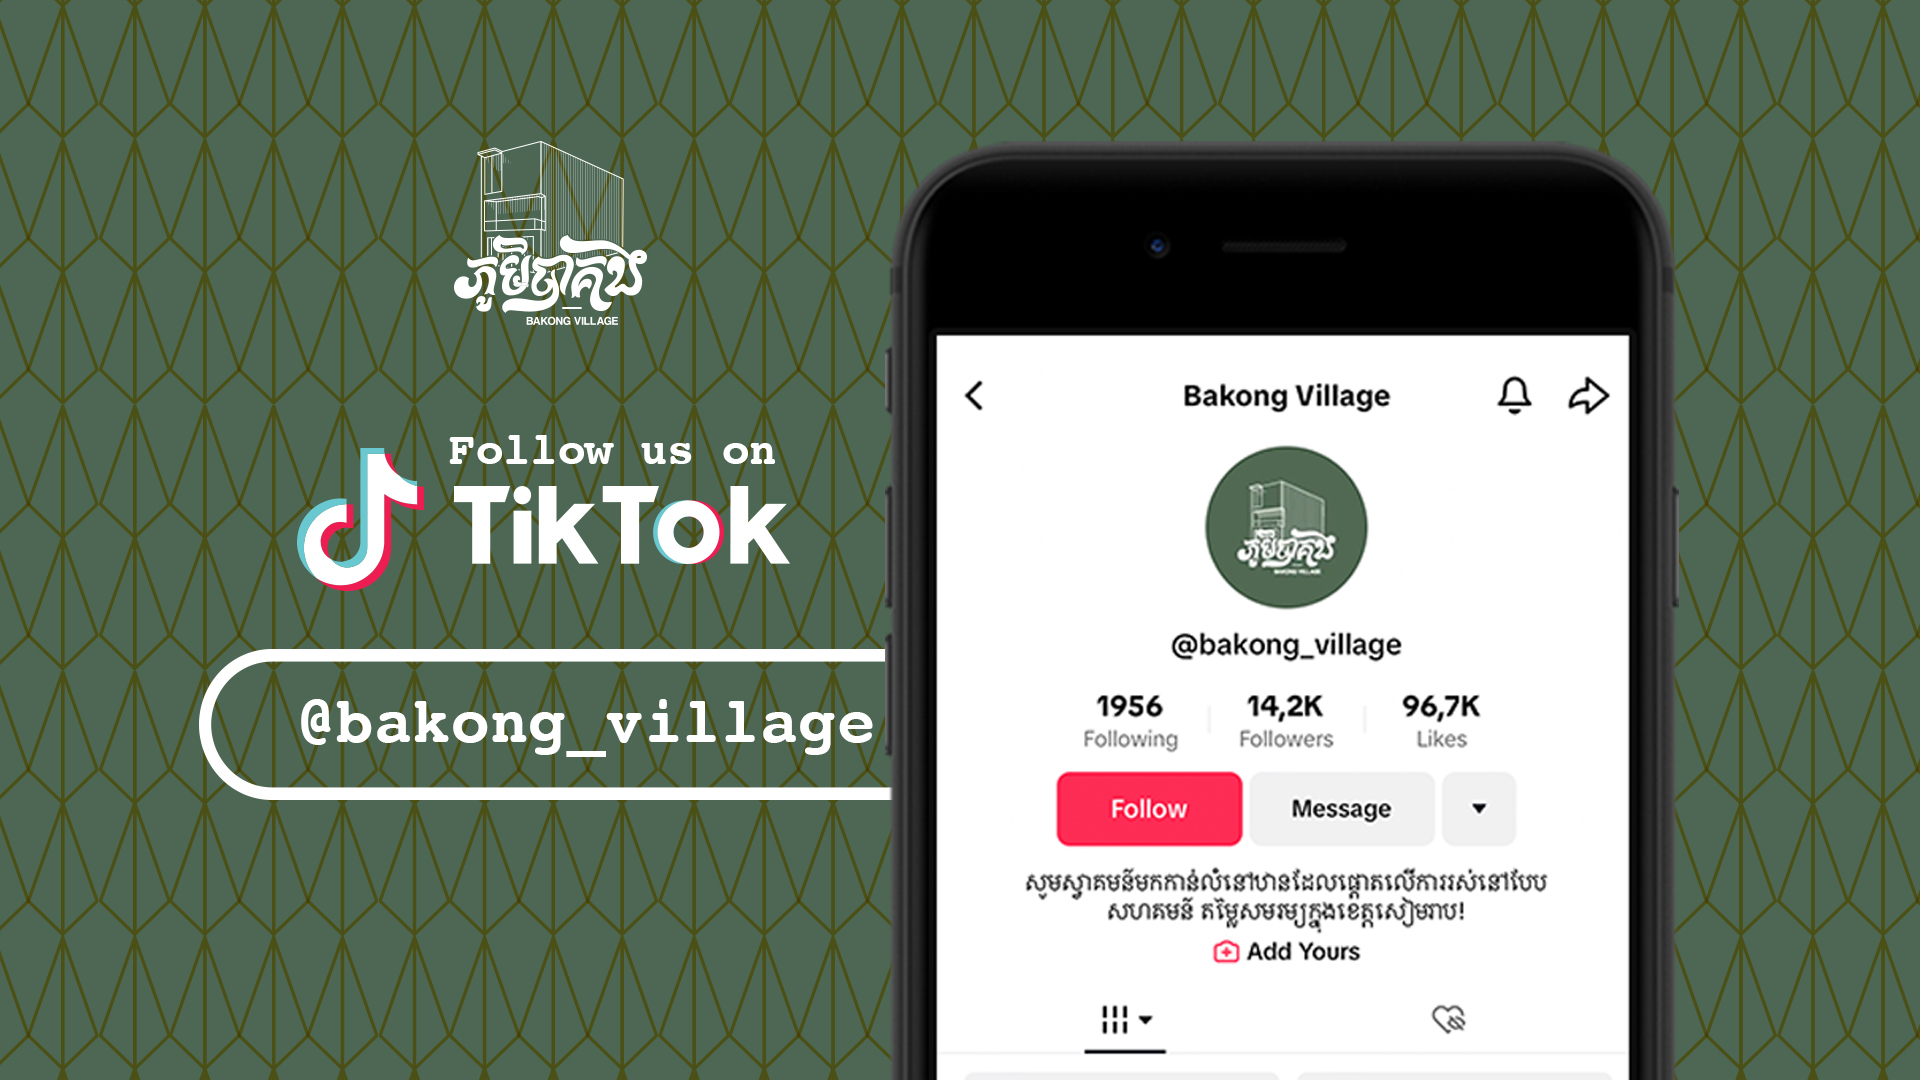 Get to know Bakong Village with our engaging content